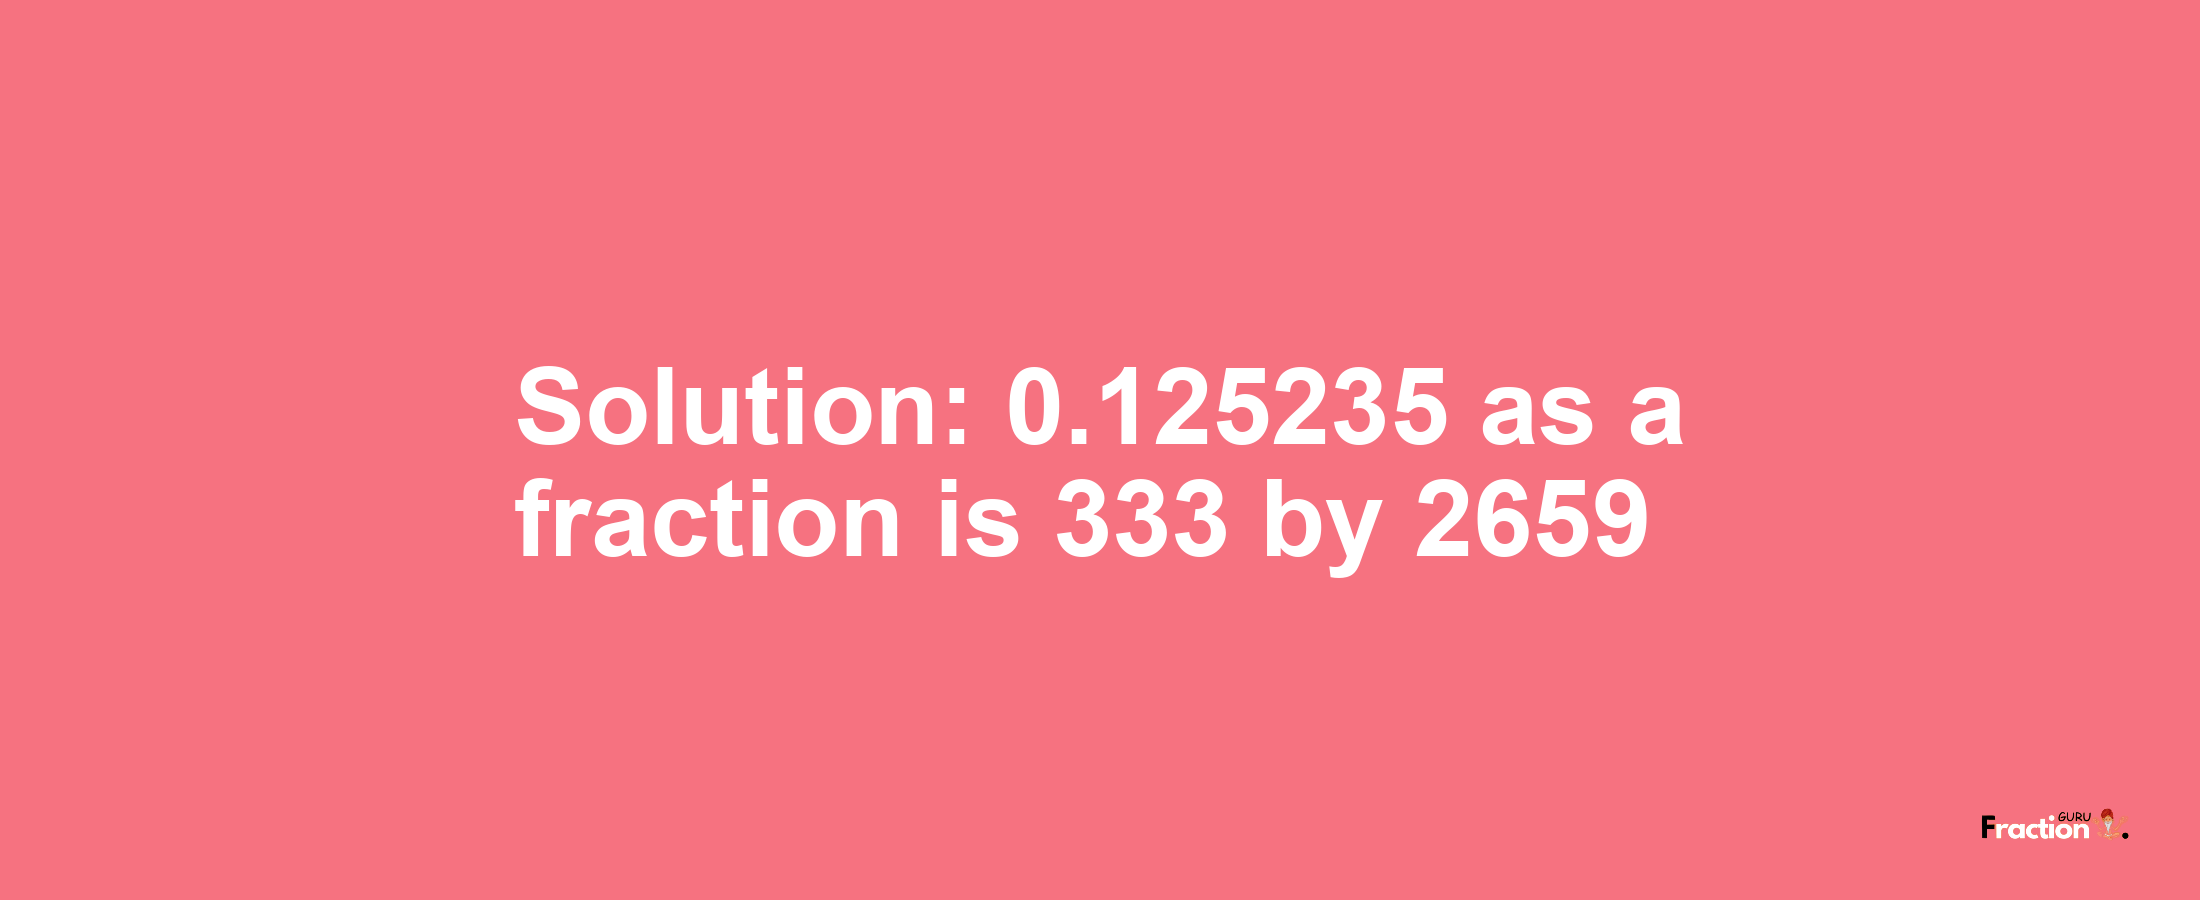 Solution:0.125235 as a fraction is 333/2659